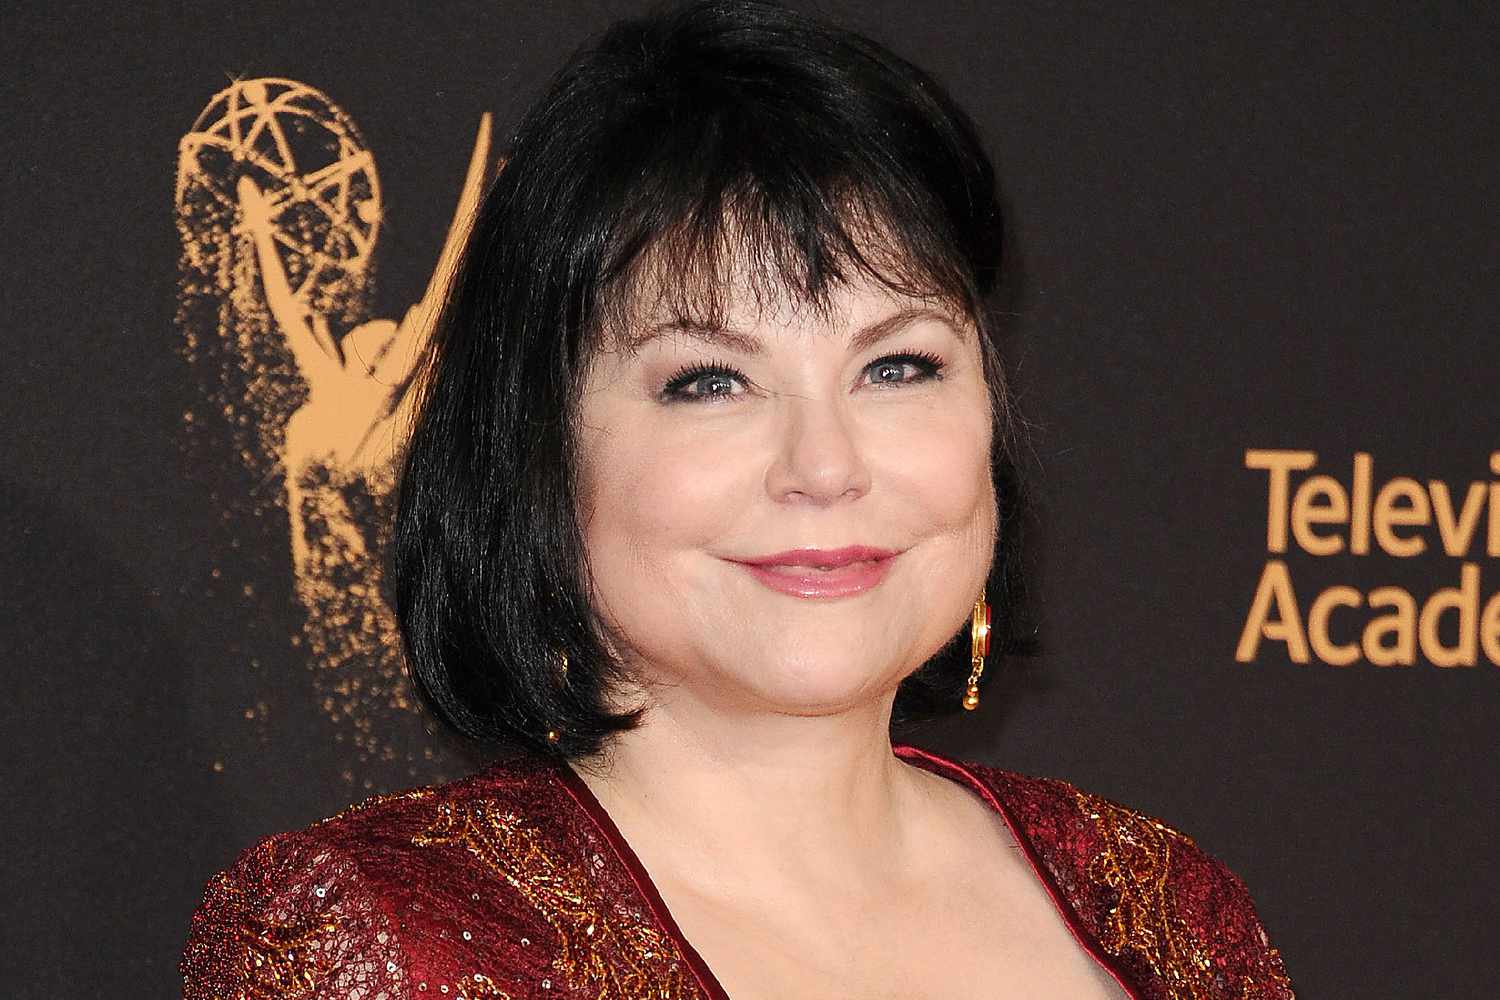 Delta Burke Opens Up About Ugly and Very Sad Exit from ‘Designing Women’ [Video]